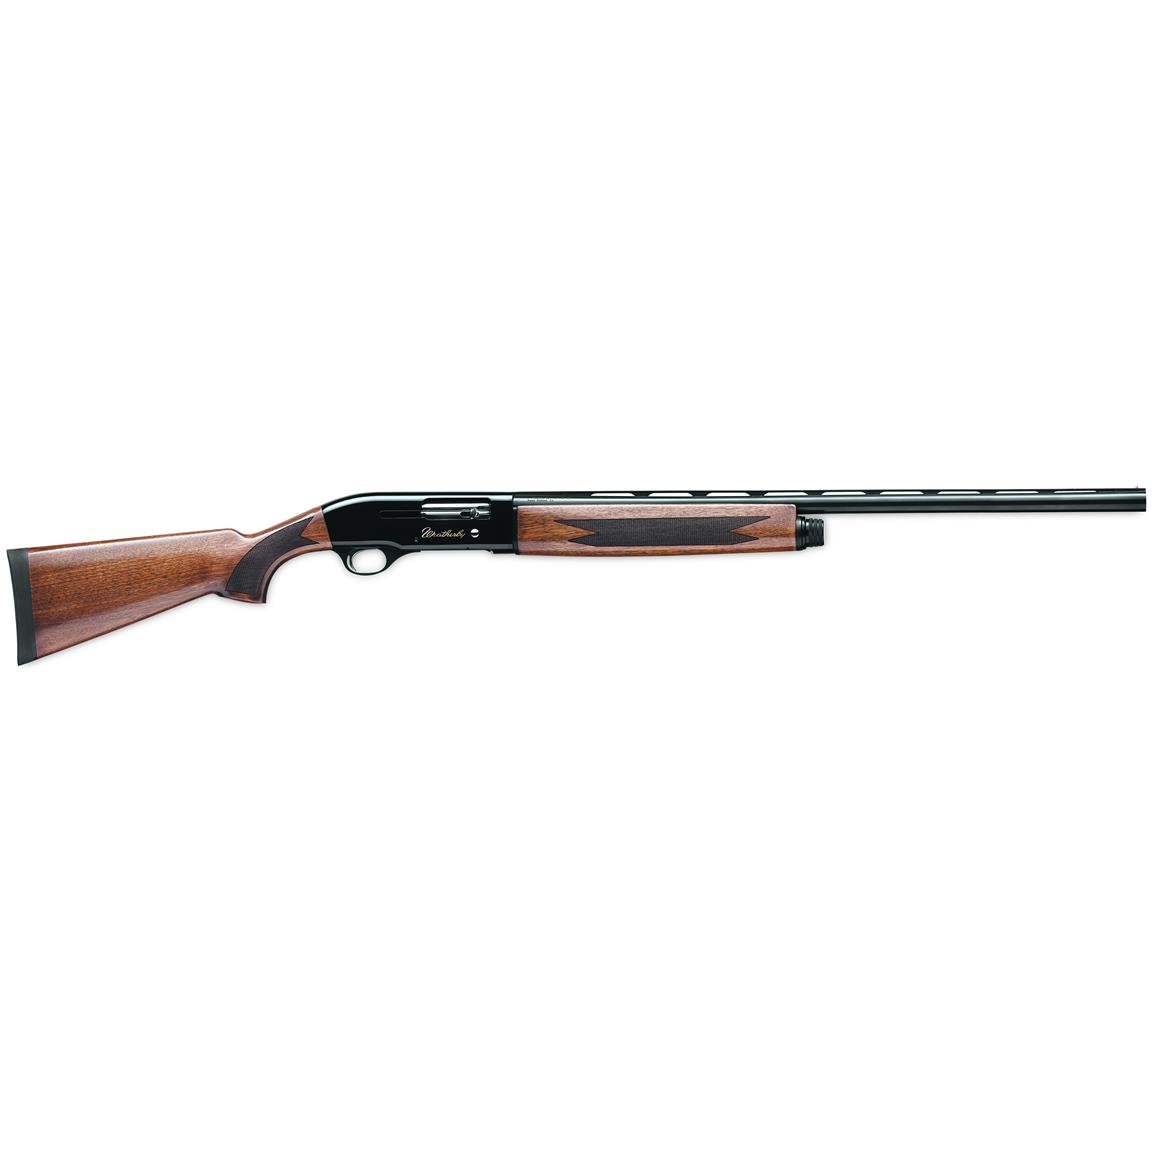 Weatherby SA-08 Deluxe, Semi-Automatic, 12 Gauge, 28" Barrel, 4+1 Rounds